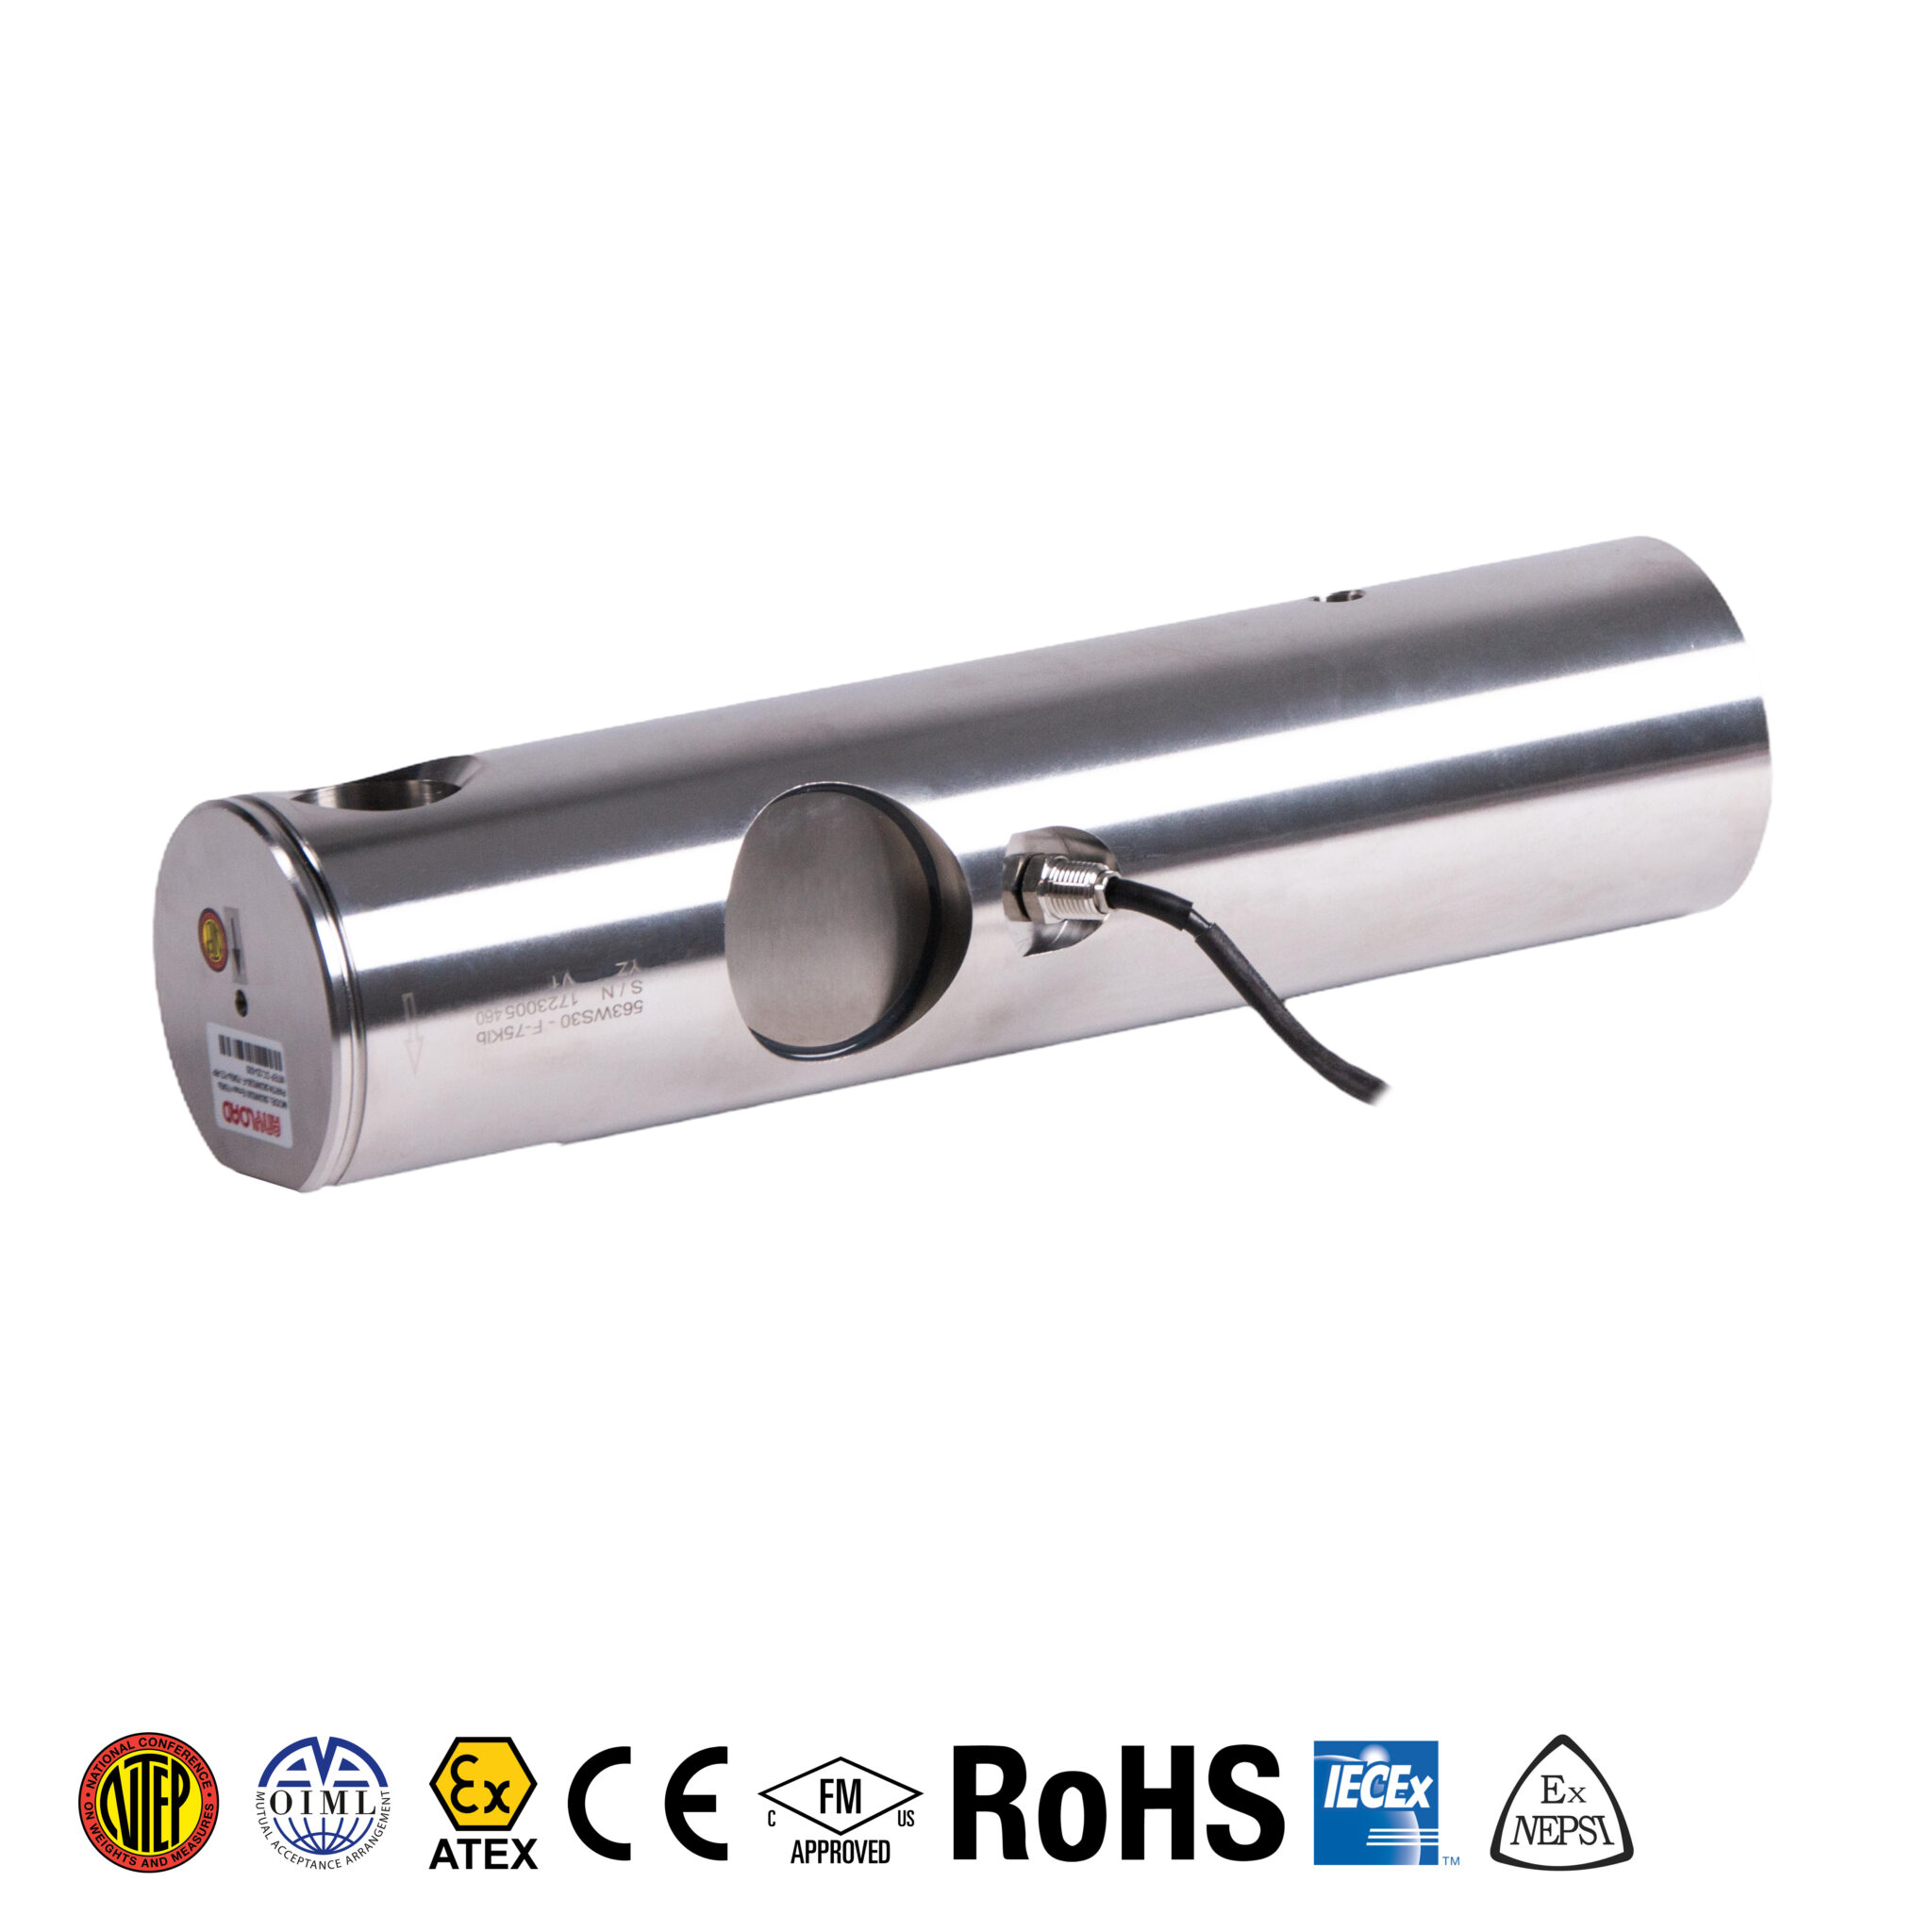 a photo of the anyload 563ws30 load cell, which is a perfect metallic cylinder with a signal wire protruding about half the length, and a circular shape along its side. The object's length is about 5 times its circumference